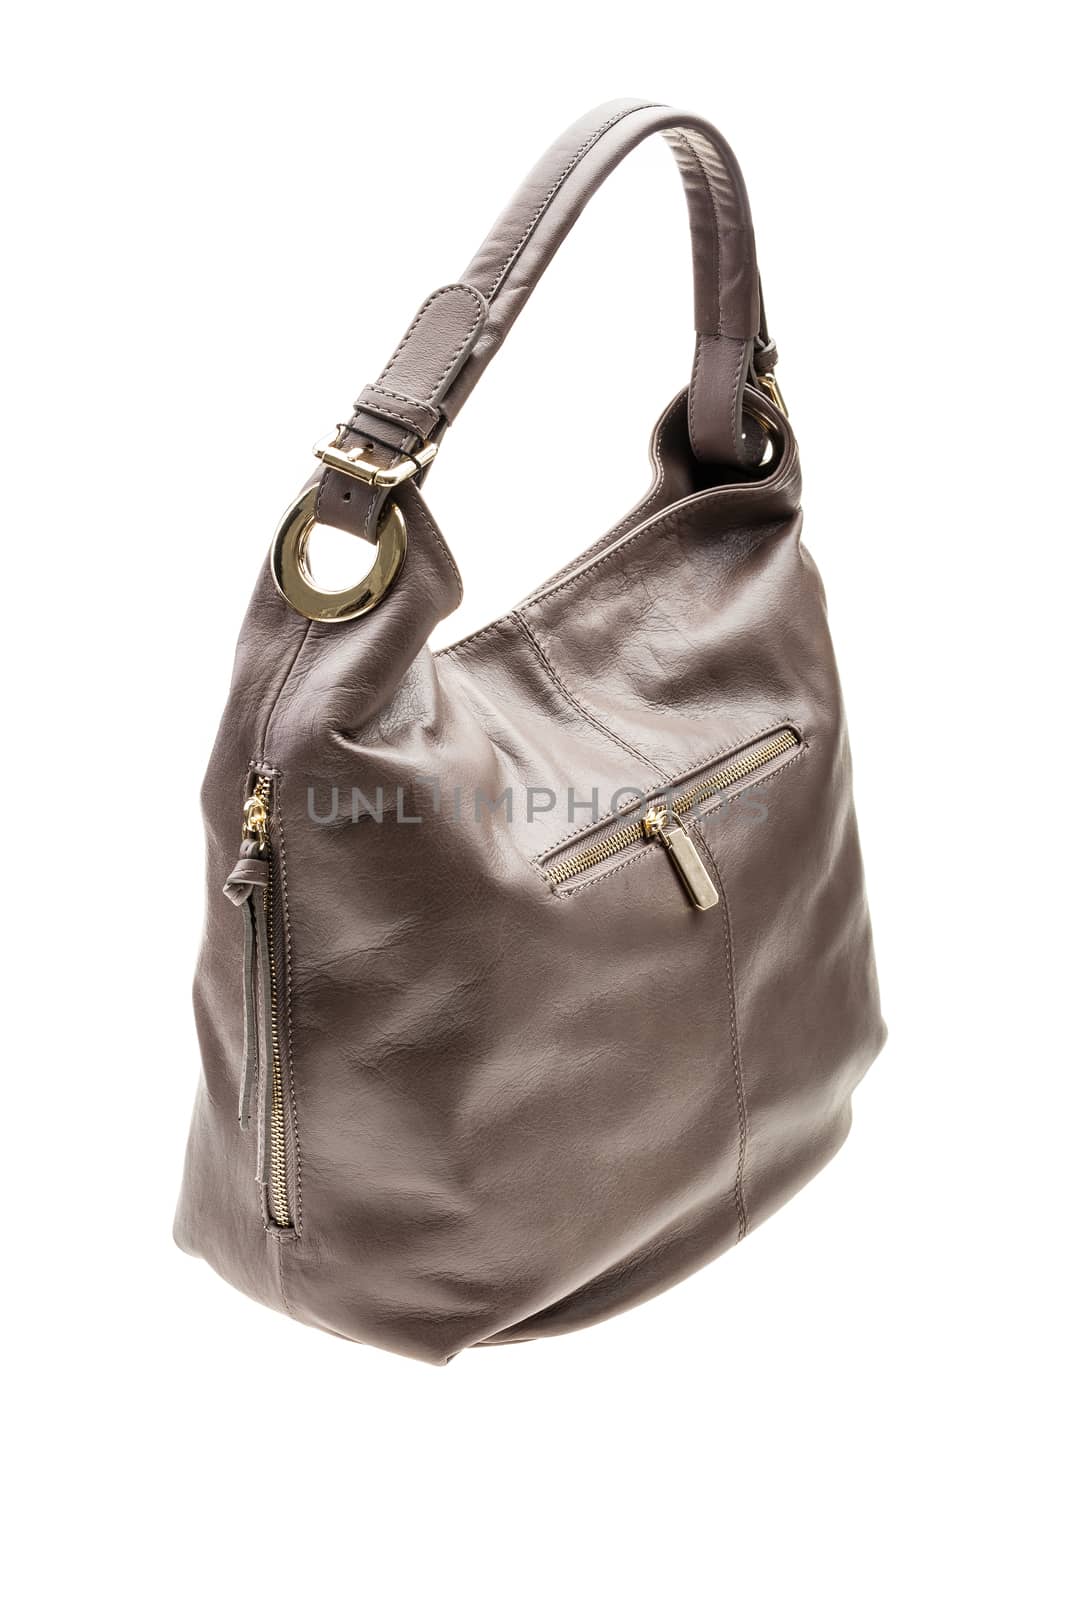 New brown womens bag isolated on white background.